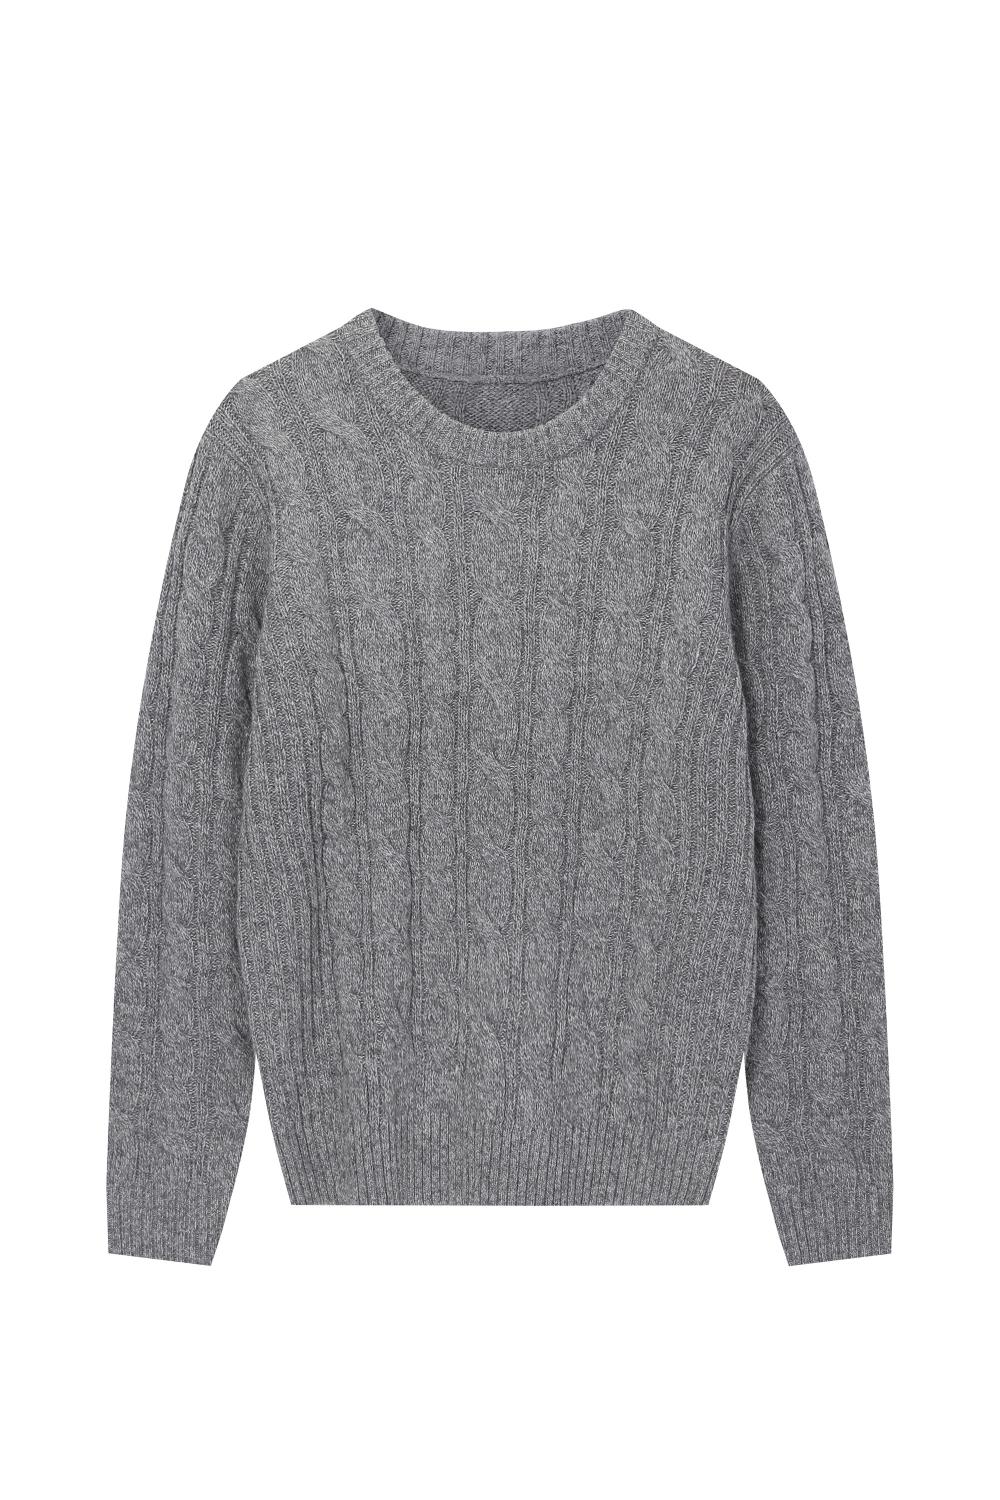 Men's Knitted Crew-Neck Cable Pullover Acrylic/Wool Sweater